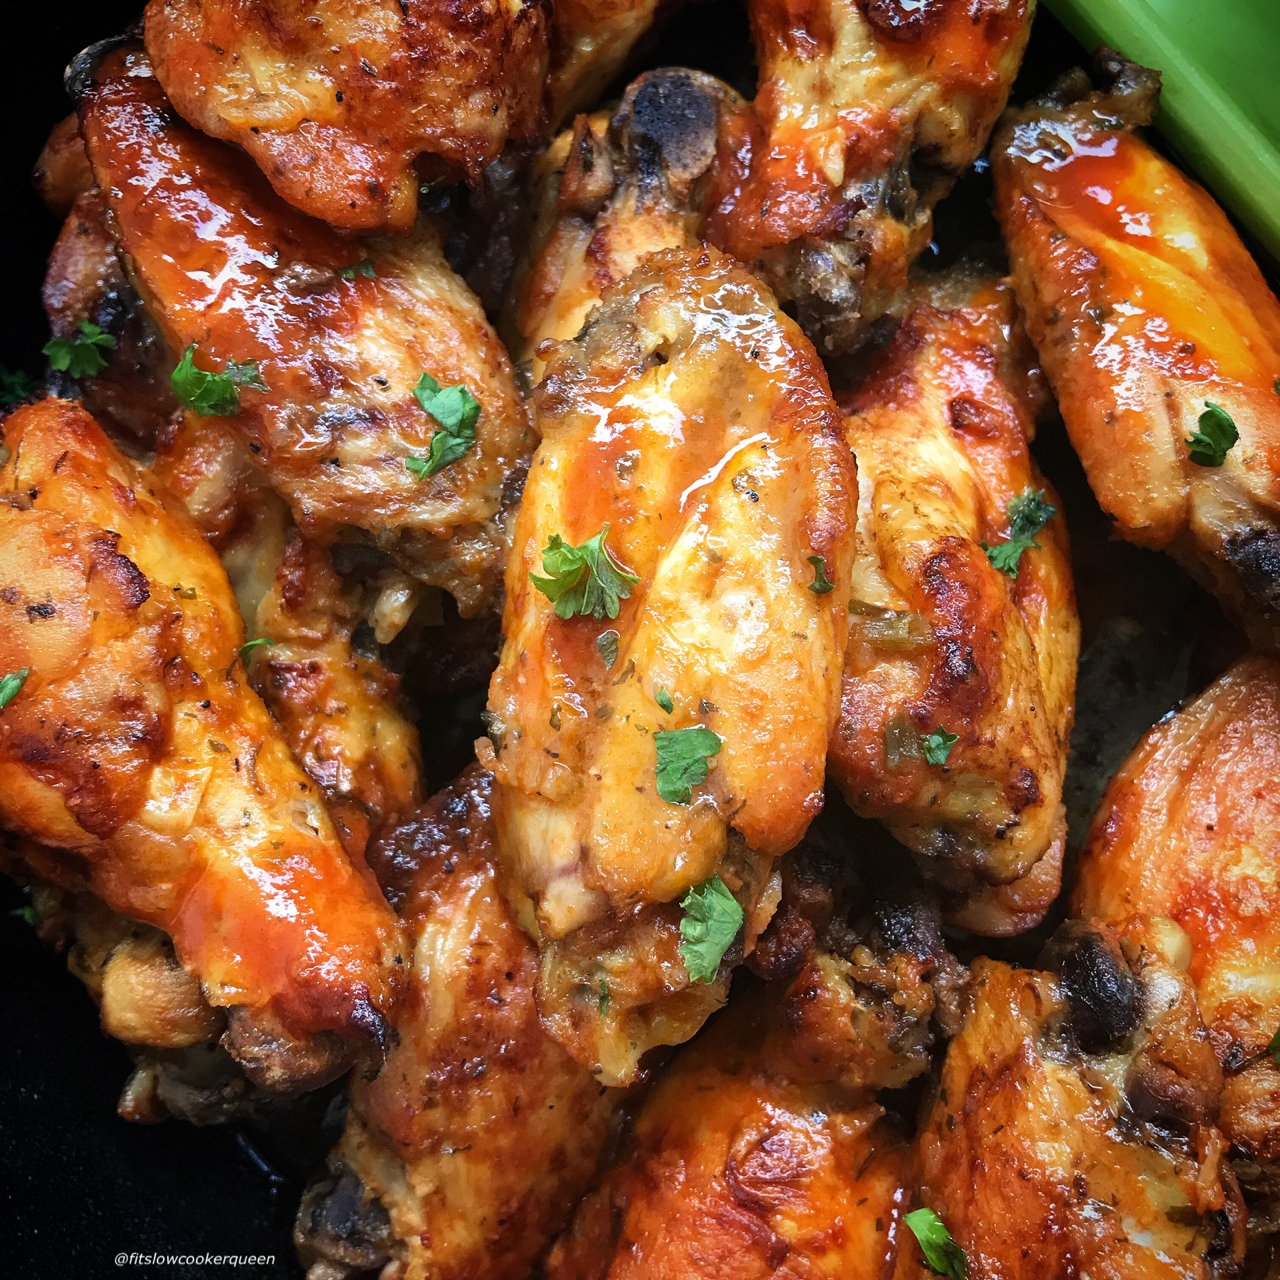 Here are healthy slow cooker buffalo chicken wings that are lactose-free, paleo, whole30, and use a homemade ranch mix! Serve these wings at your next game-day gathering, potluck or weekday snack.